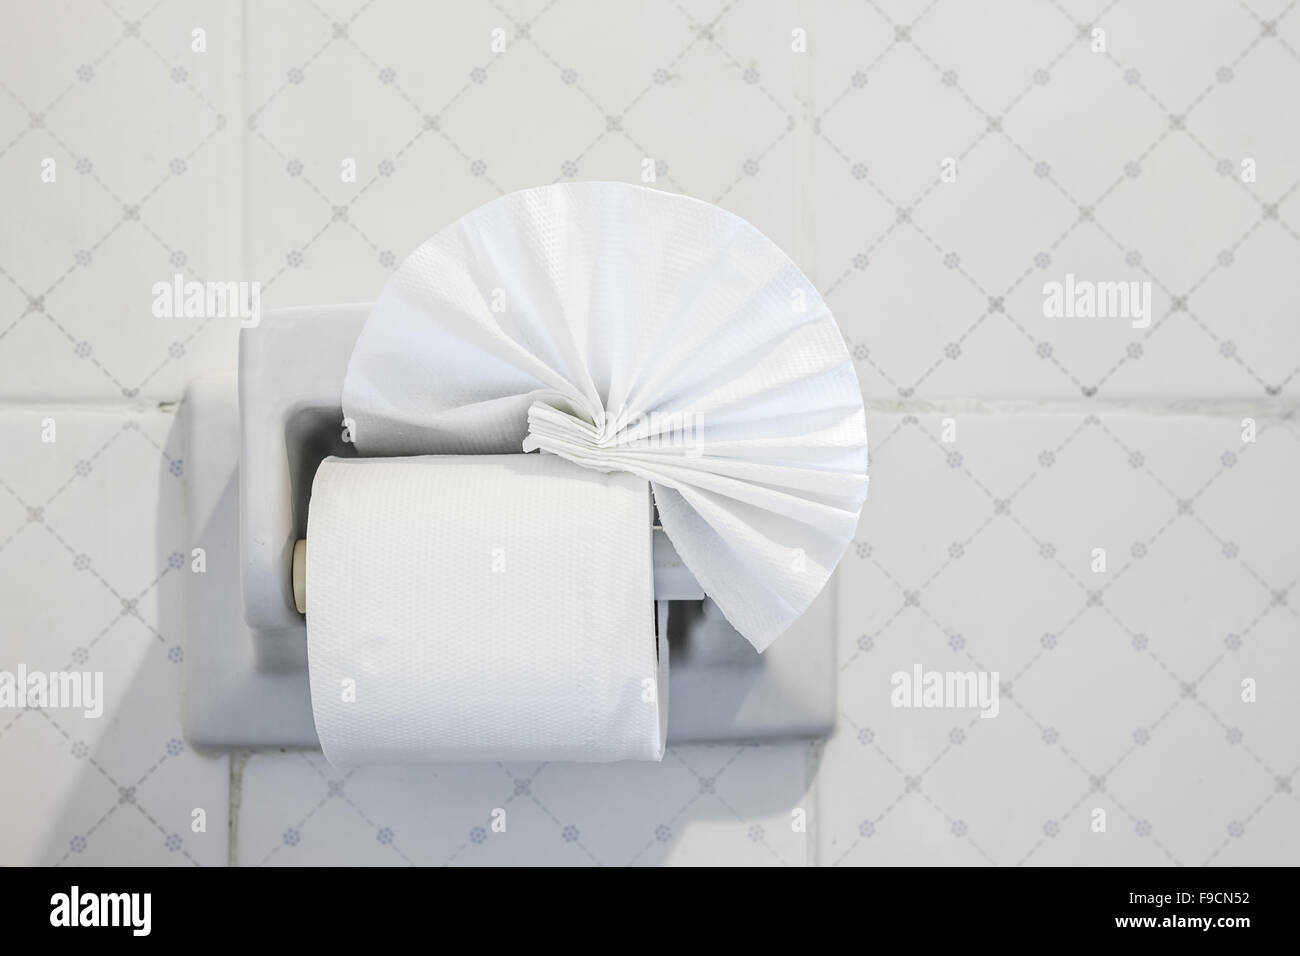 folded toilet paper on the wall with a toilet paper holder Stock Photo